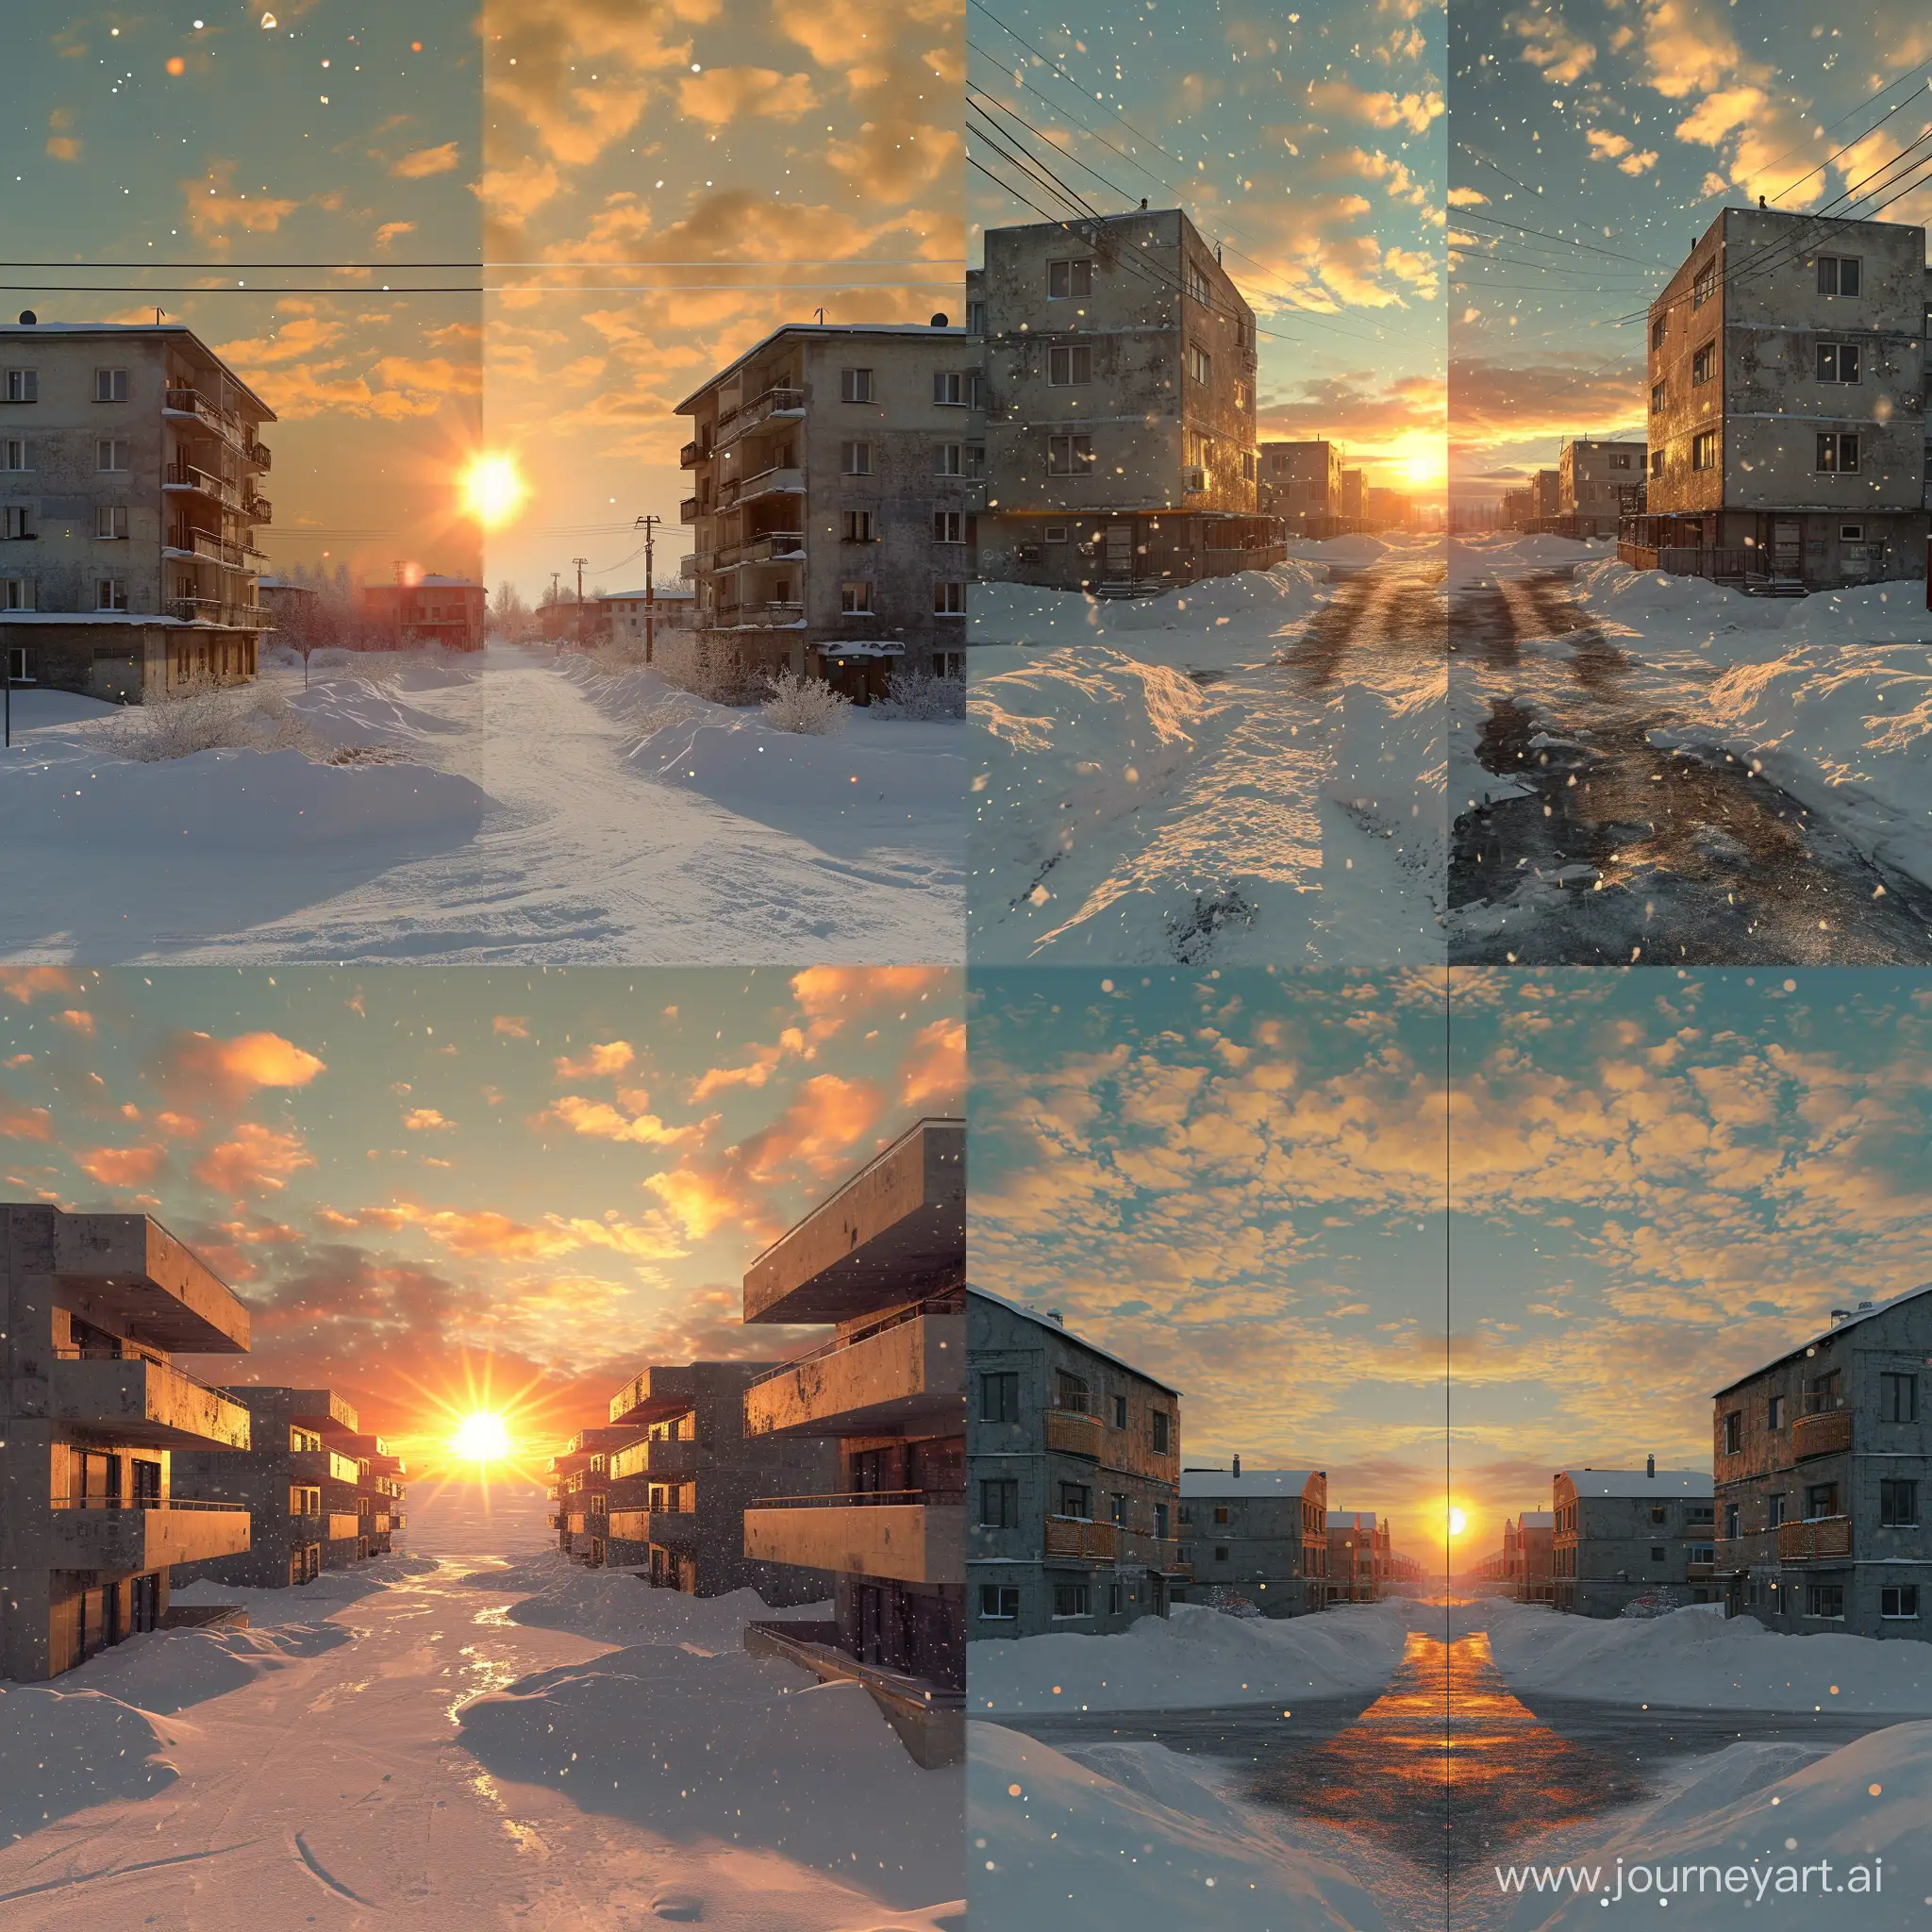 CINEMATIC (masterpiece, high resolution, photorealistic: 1.5) Urban winter landscape. View of the intersection of two streets with five-storey houses made of concrete slabs.
Snow sparkles in the sun, snowdrifts reach record heights, the temperature drops to twelve degrees below zero, the sky is decorated with thin clouds.
Three episodes: The morning begins with a golden dawn that turns the sky and clouds orange. The sun appears on the horizon, blinding with its radiant radiance. Noon brings a zenith glow that illuminates everything around. The sun reaches its highest point, creating hot lighting and peak solar activity. The evening ends with fiery colors that spread across the sky. The sun goes below the horizon, leaving behind a sparkling farewell and a magnificent end to the day.
